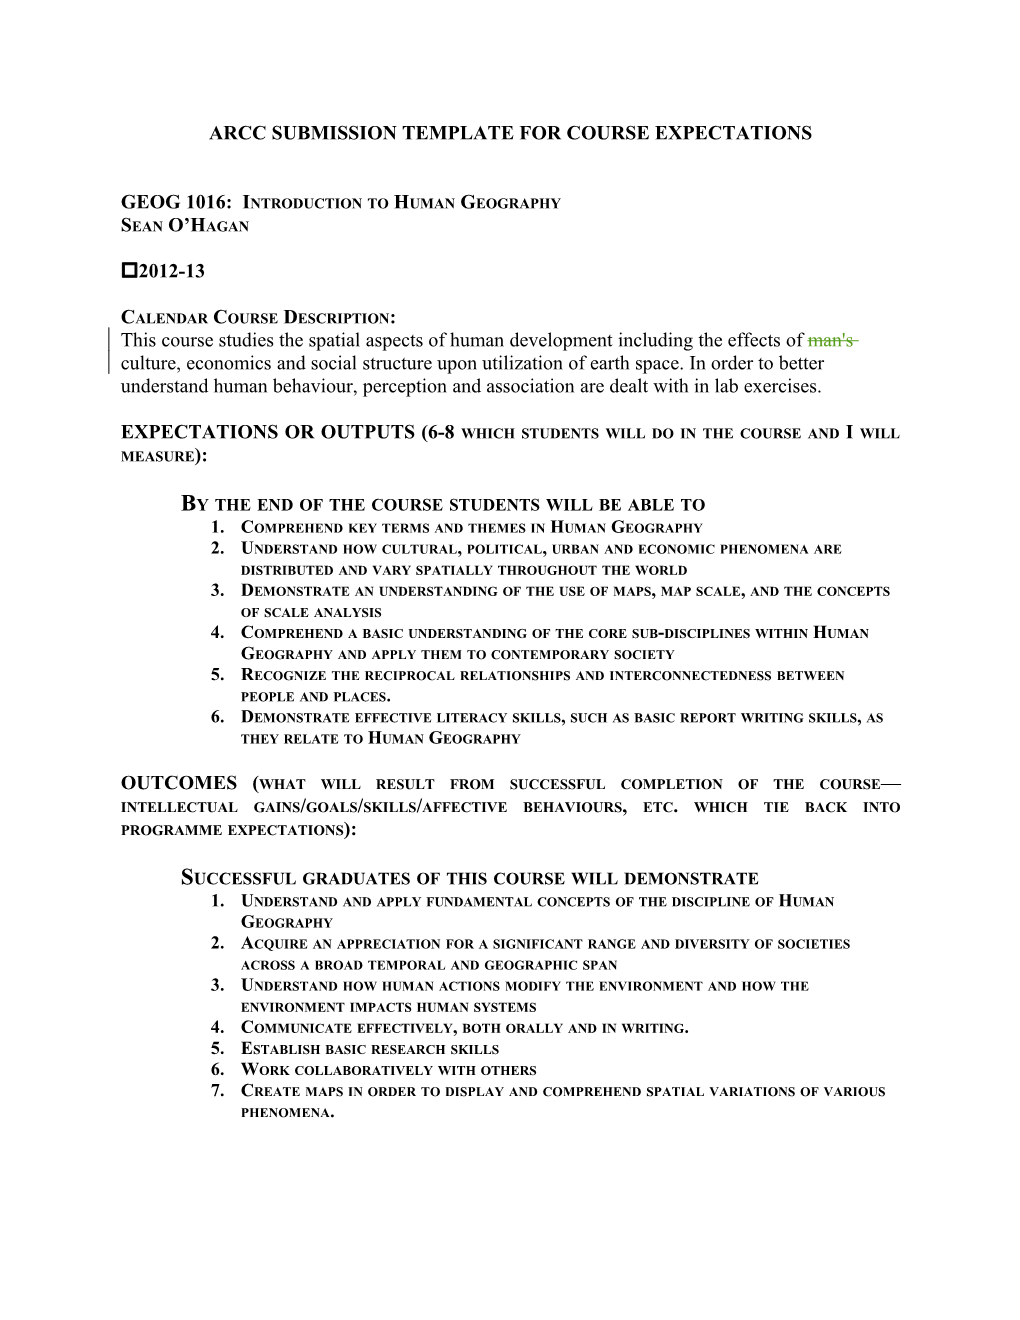 Arcc Submission Template for Course Expectations